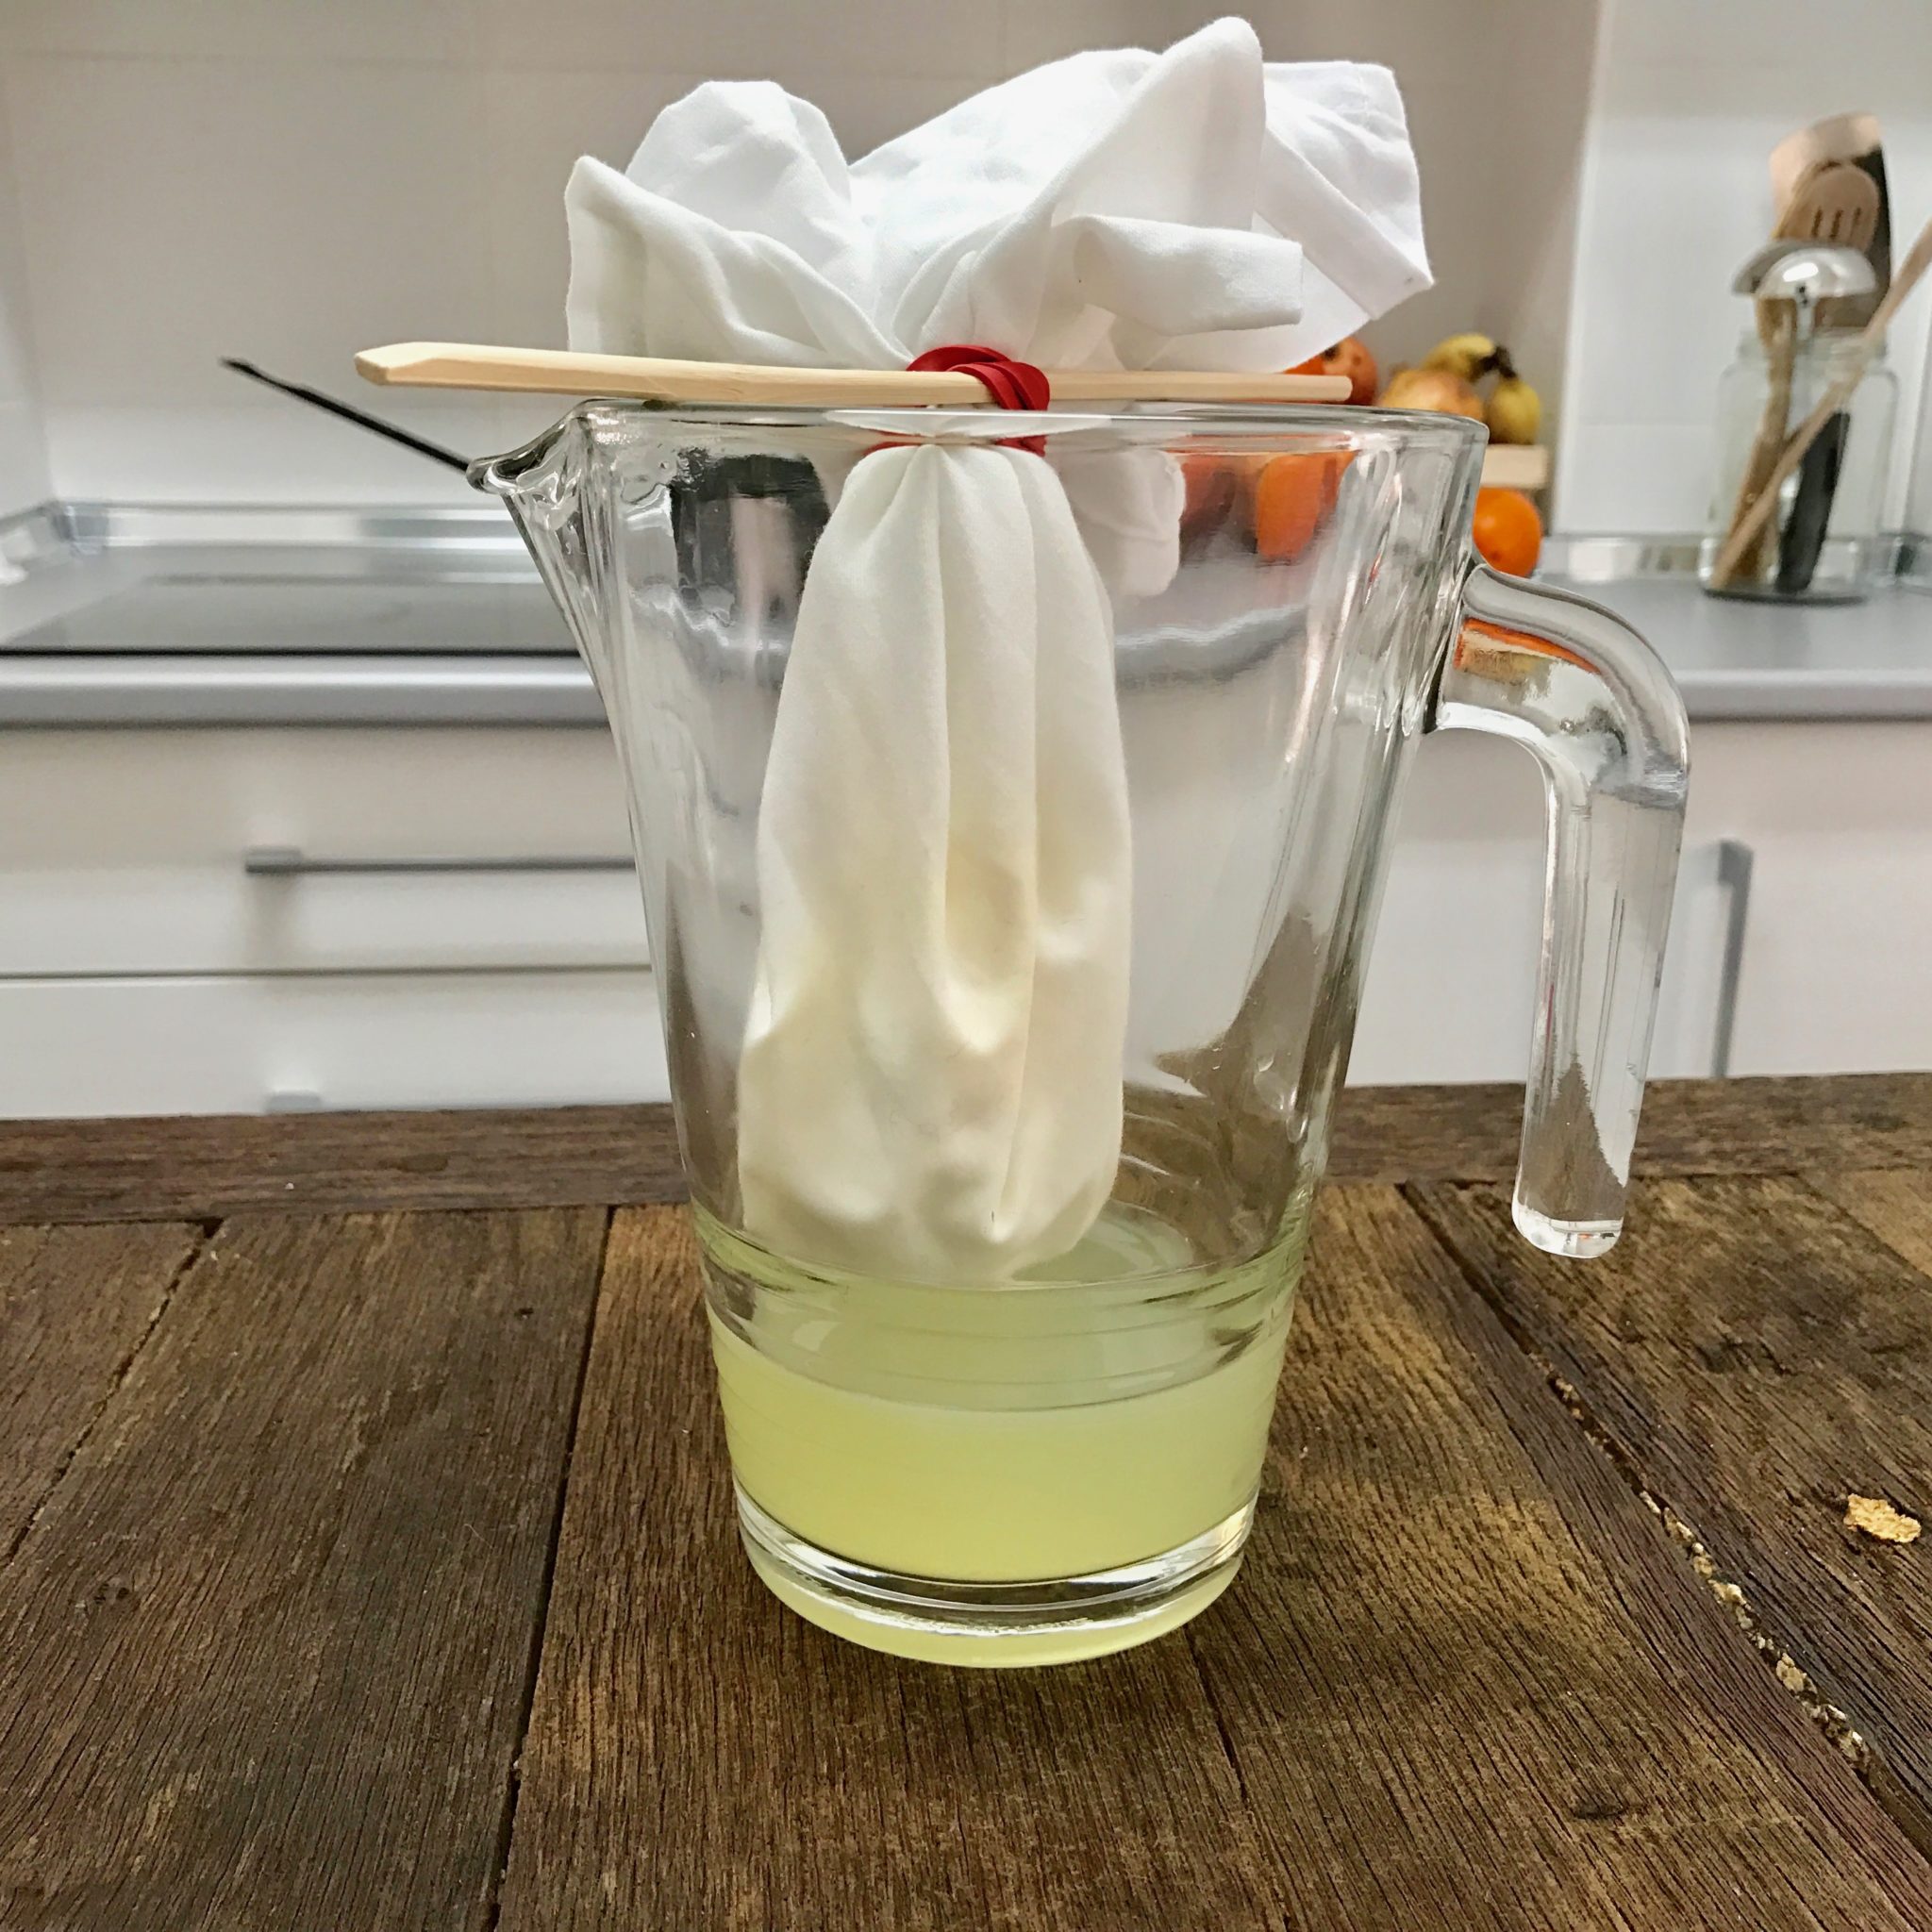 tie the napkin and hang it on the pitcher 'til stops dripping